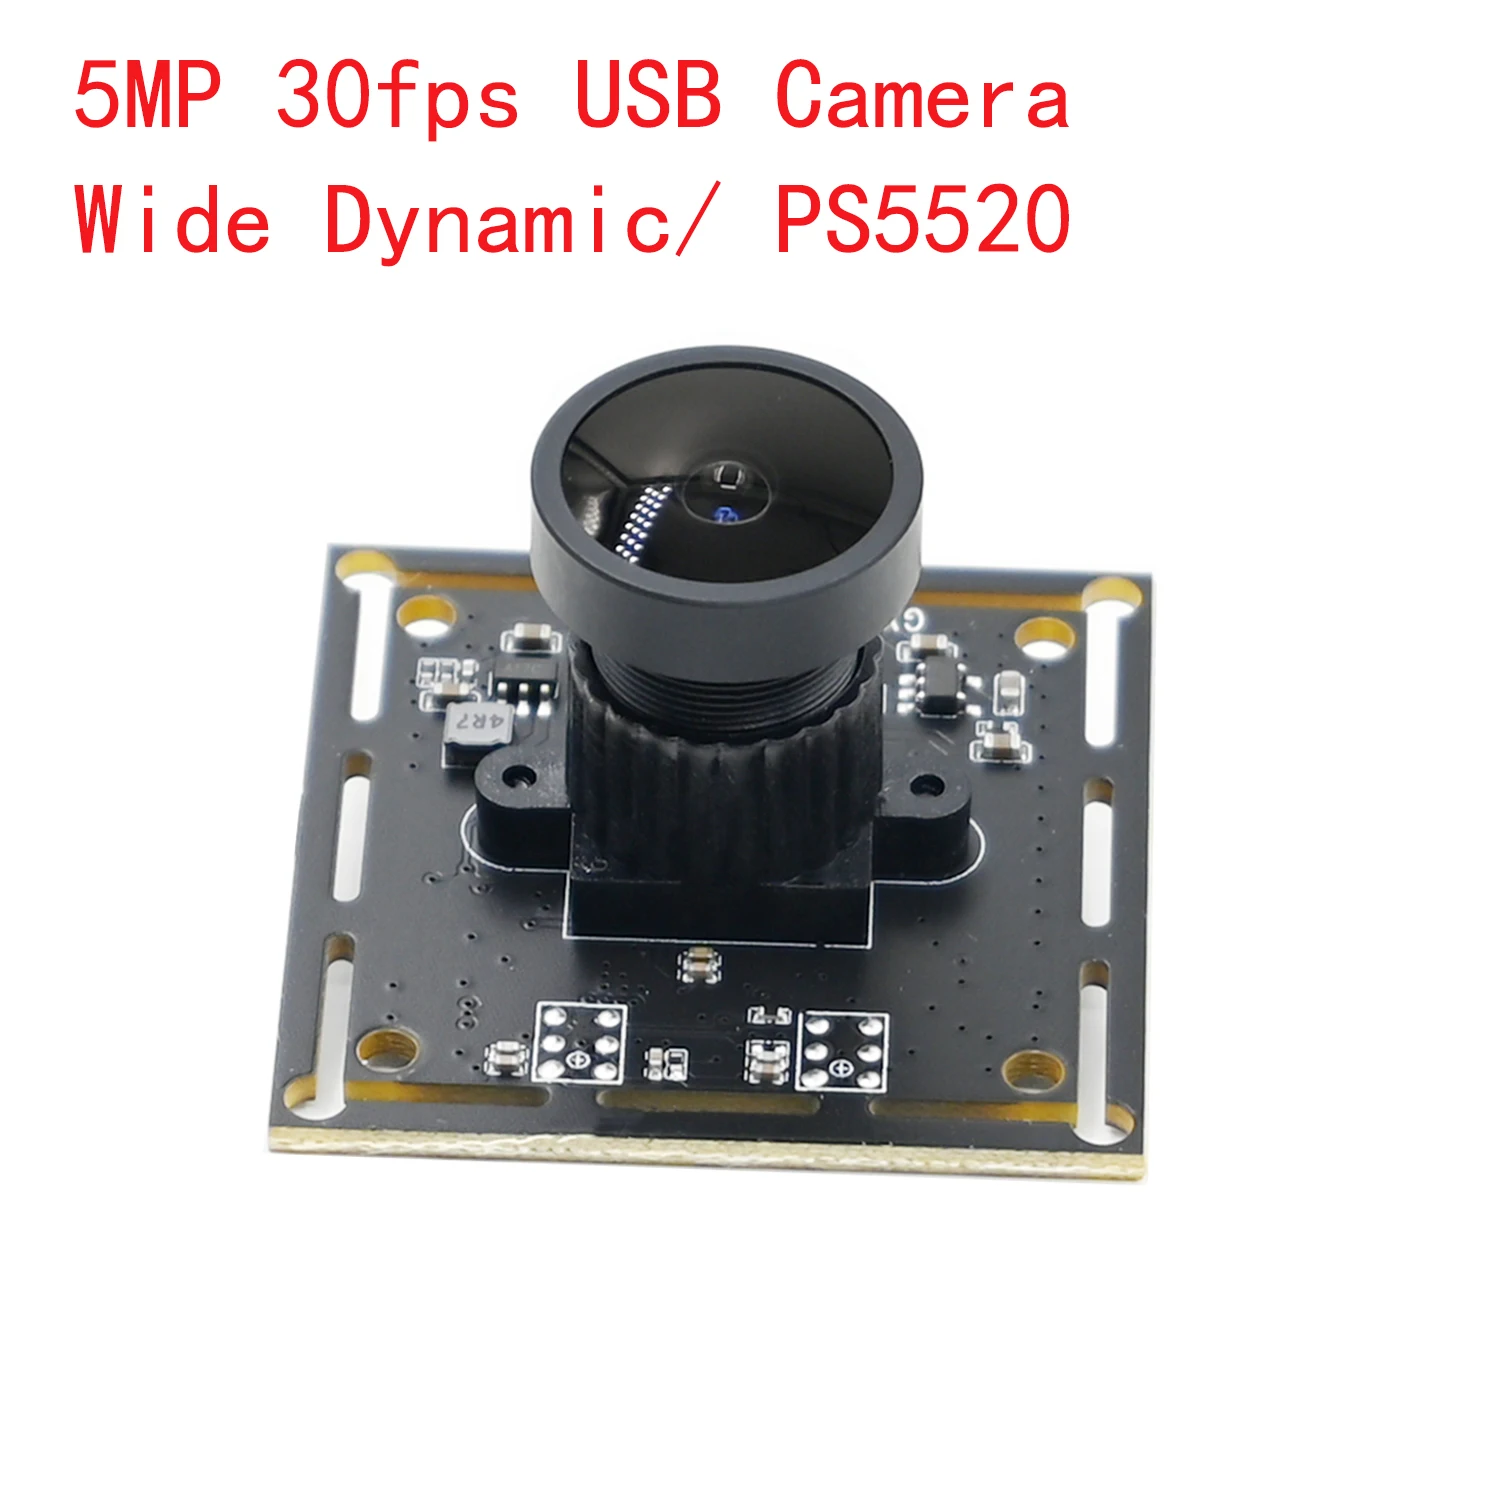 WDR 5MP USB Camera Module, High Dynamic Range Webcam PS5520 ,For Strong Light Suppression 2592x1944 30fps Plug And Play